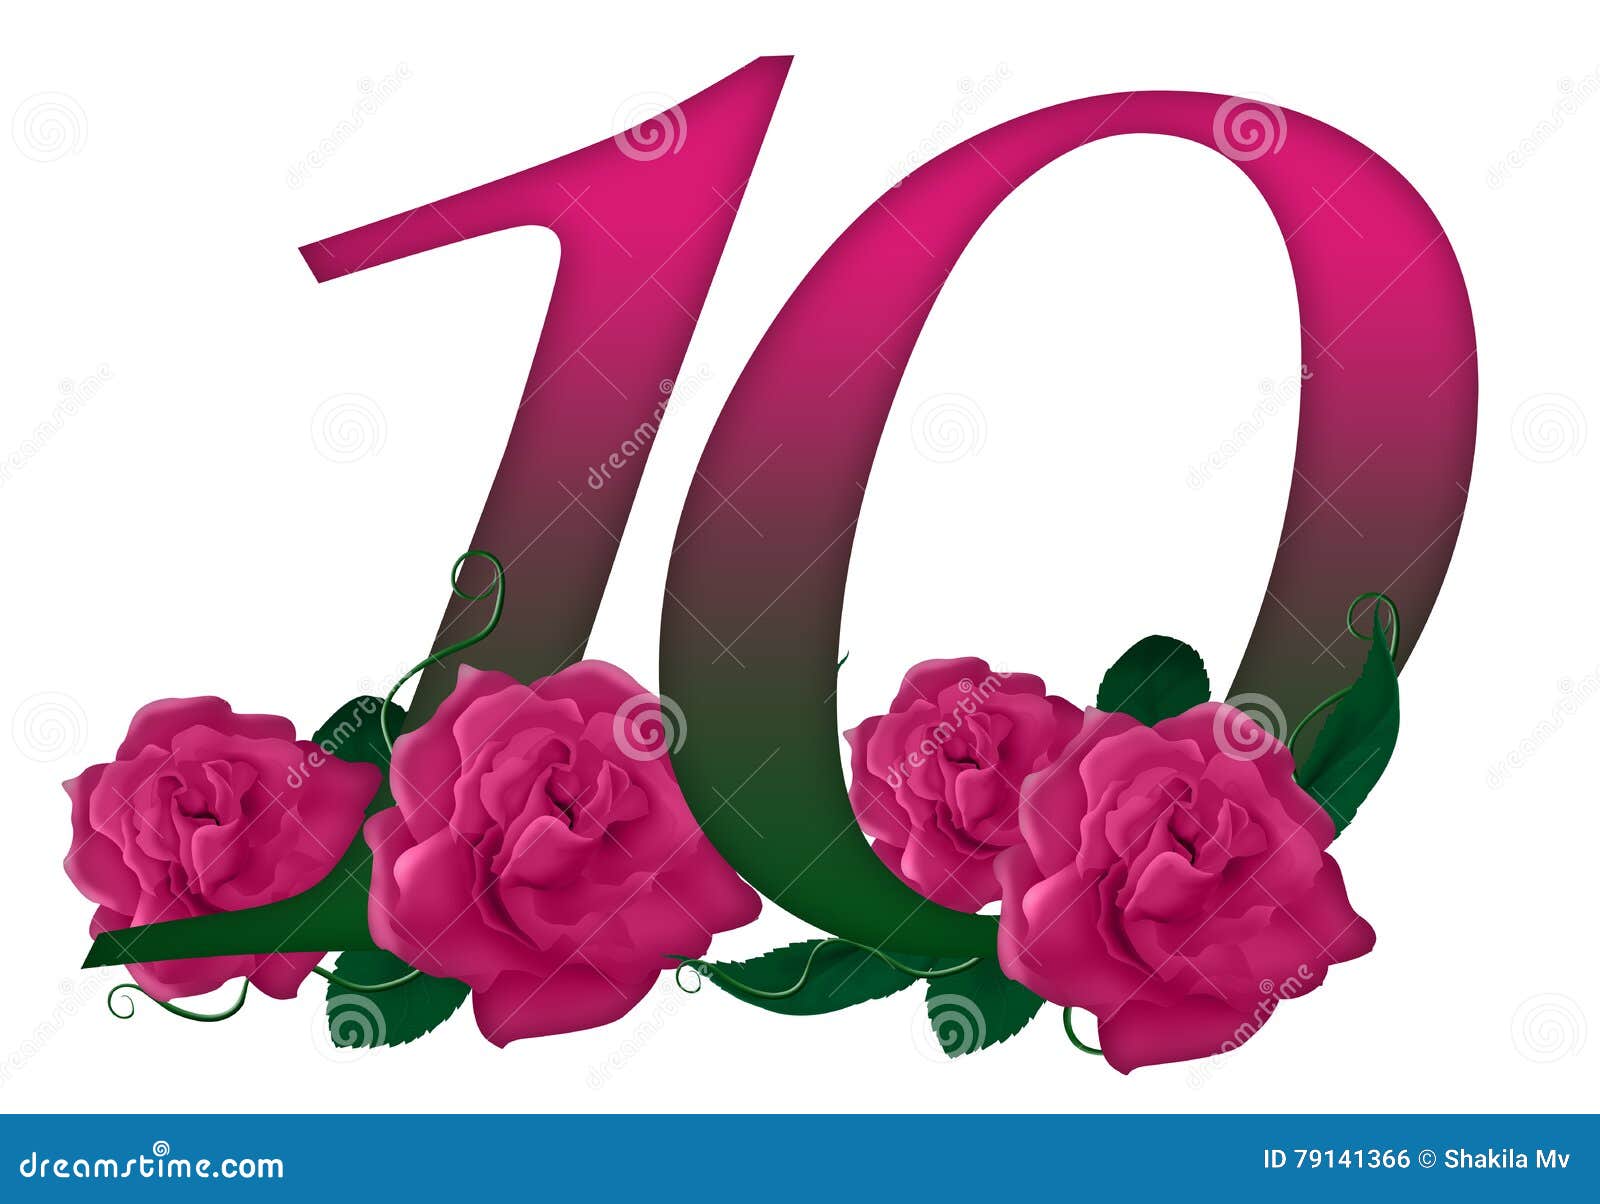 ПОЗДРАВЛЯЛКИ - Страница 10 Number-floral-cute-pink-rose-decorated-79141366